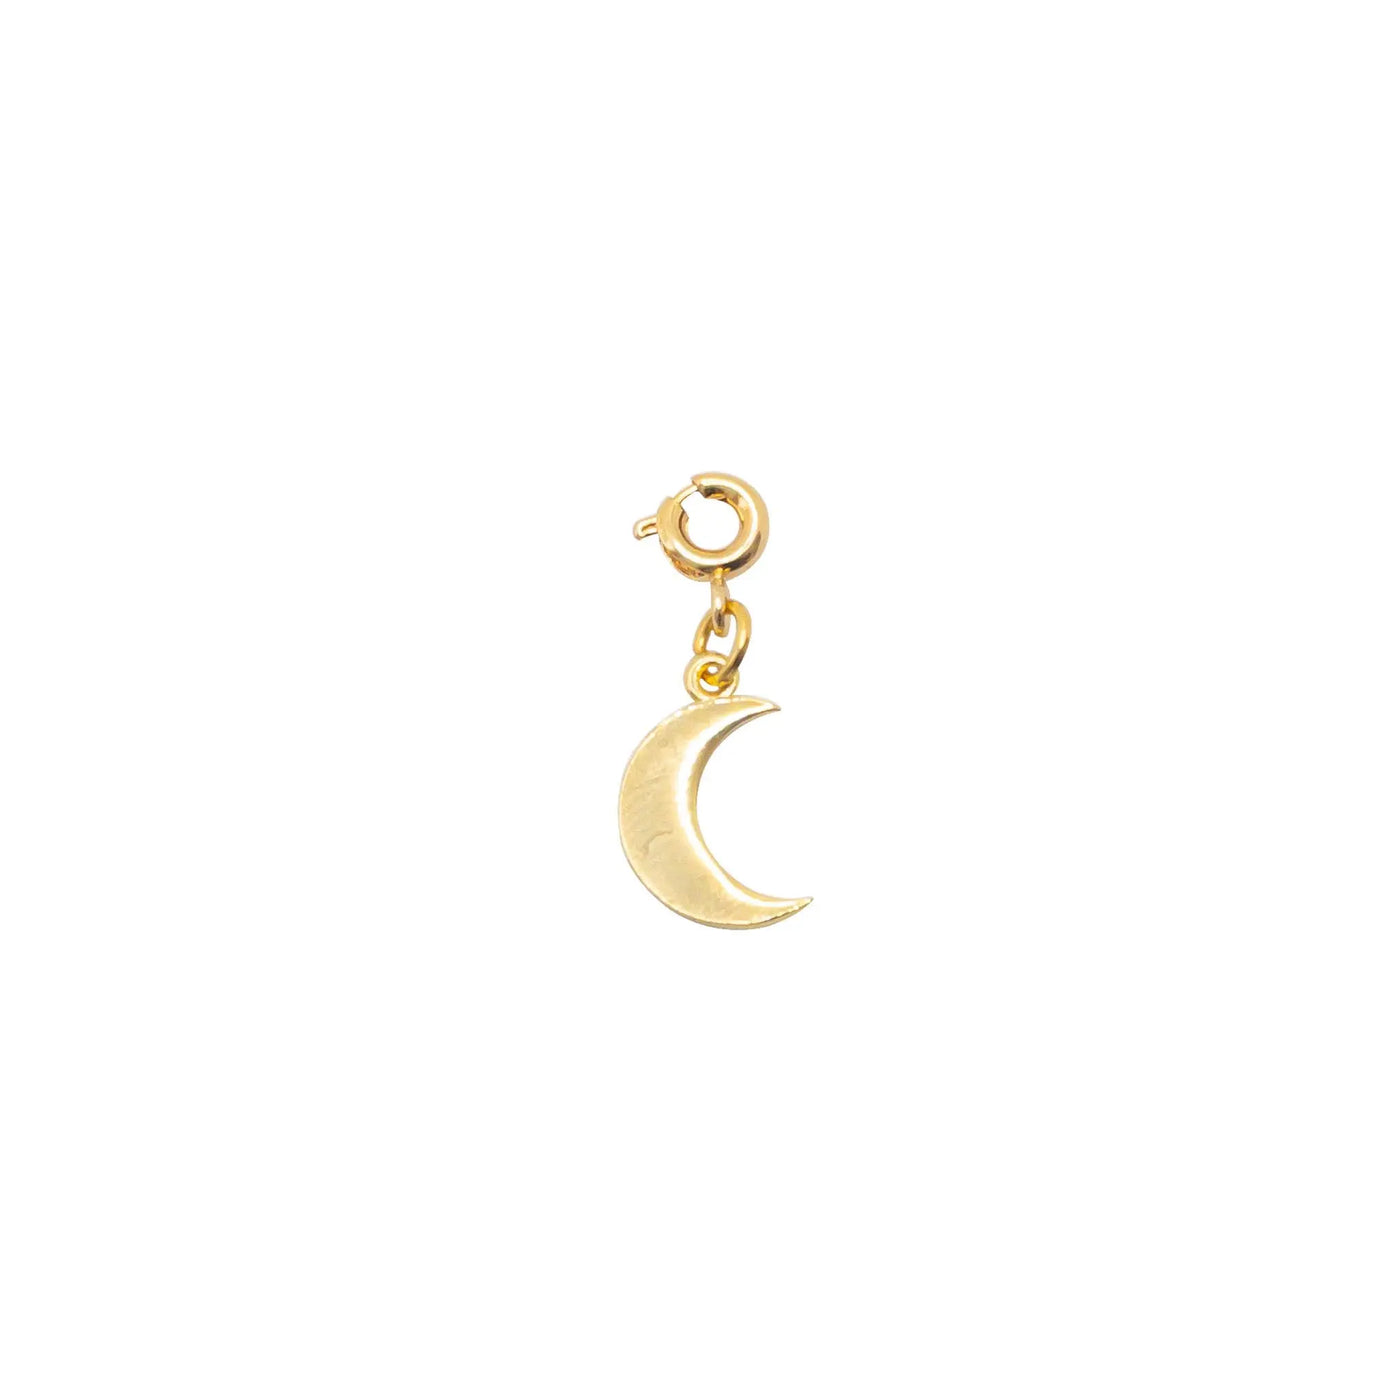 Moonlight Gold Charm LaCkore Couture